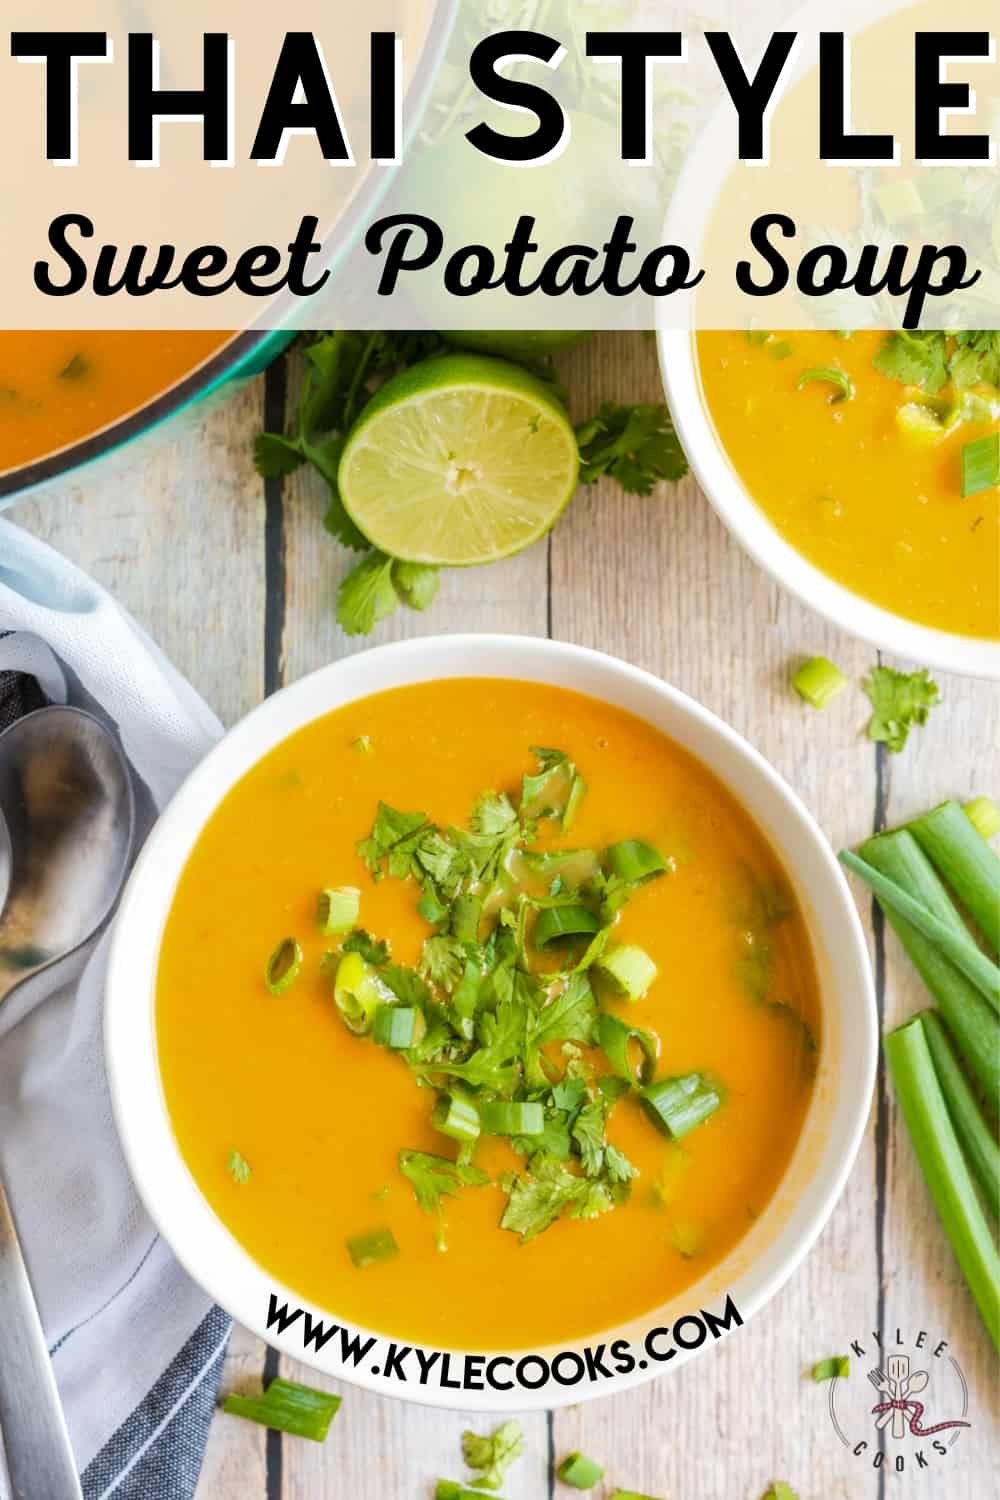 sweet potato soup in a white bowl with recipe title in text overlaid